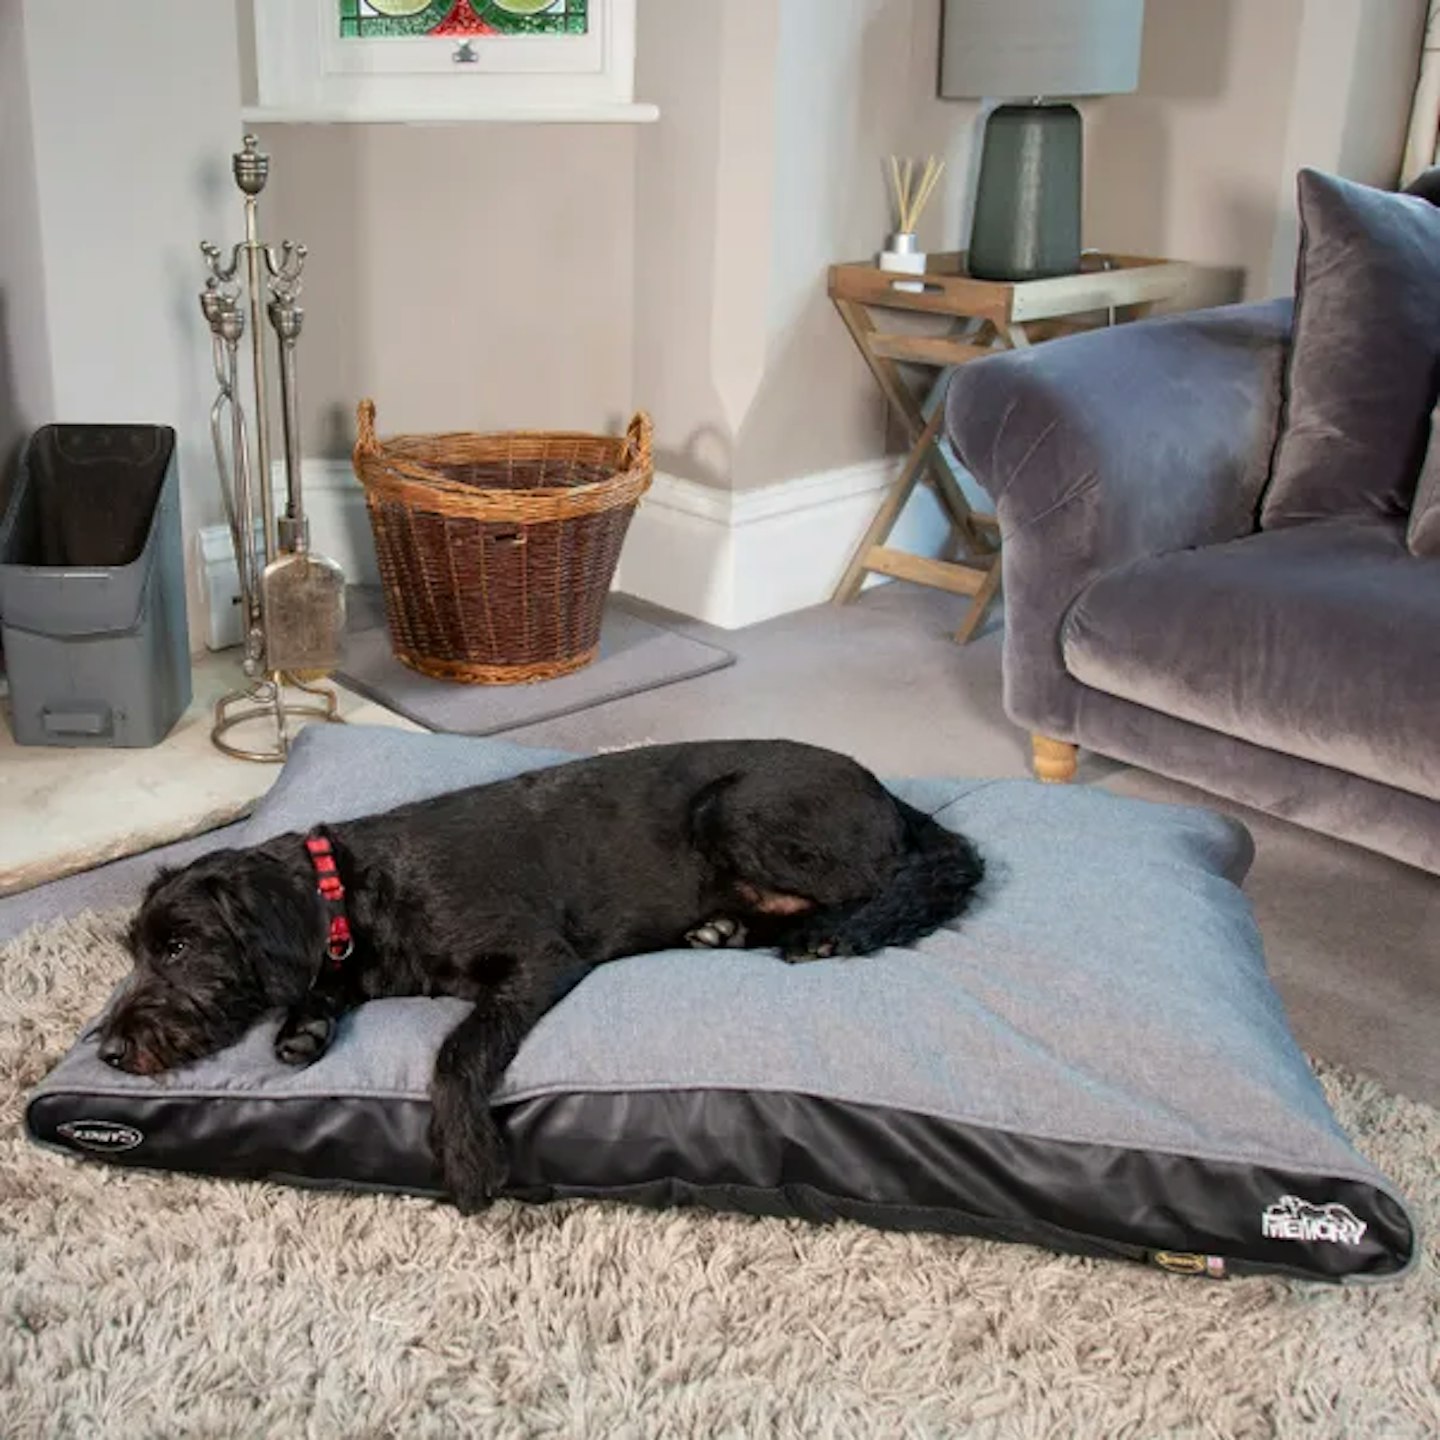 Best orthopaedic dog bed for dogs with arthritis 